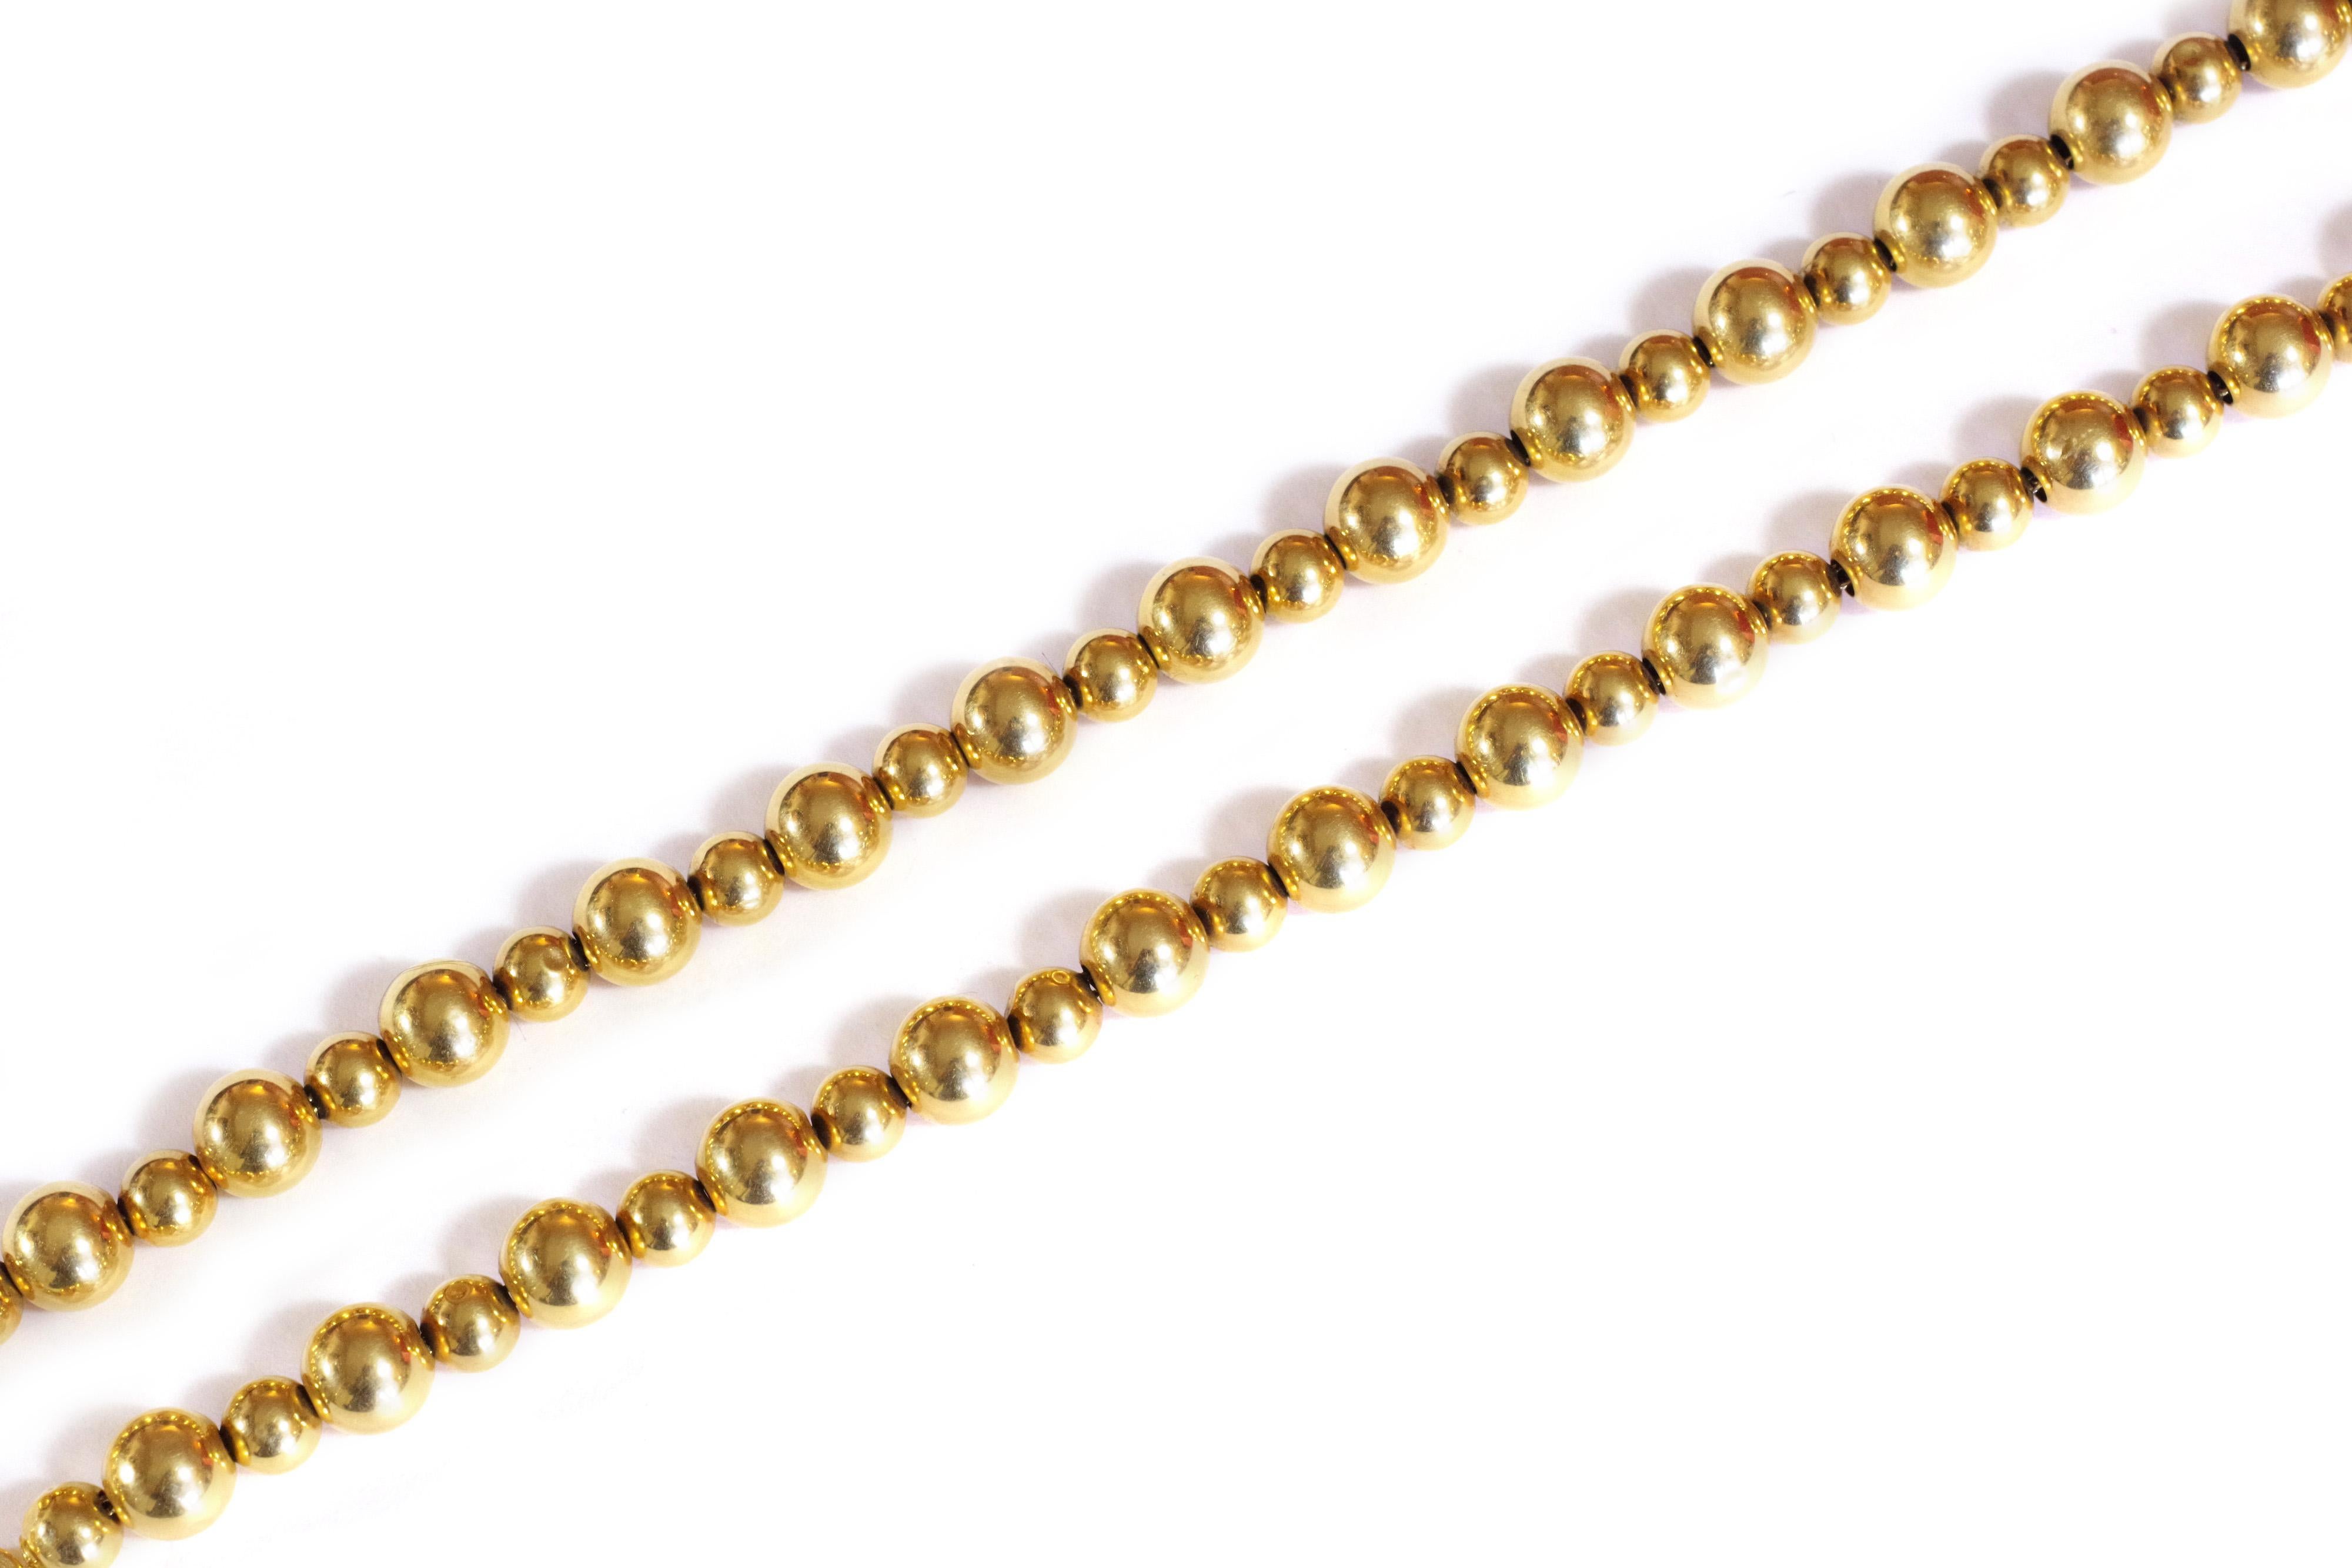 Necklace 18k gold balls in yellow gold. The necklace is composed of a long chain with fine links on which have been threaded 62 hollow gold beads. They alternate diameters more or less important. Lobster clasp. Regional necklace from the middle of